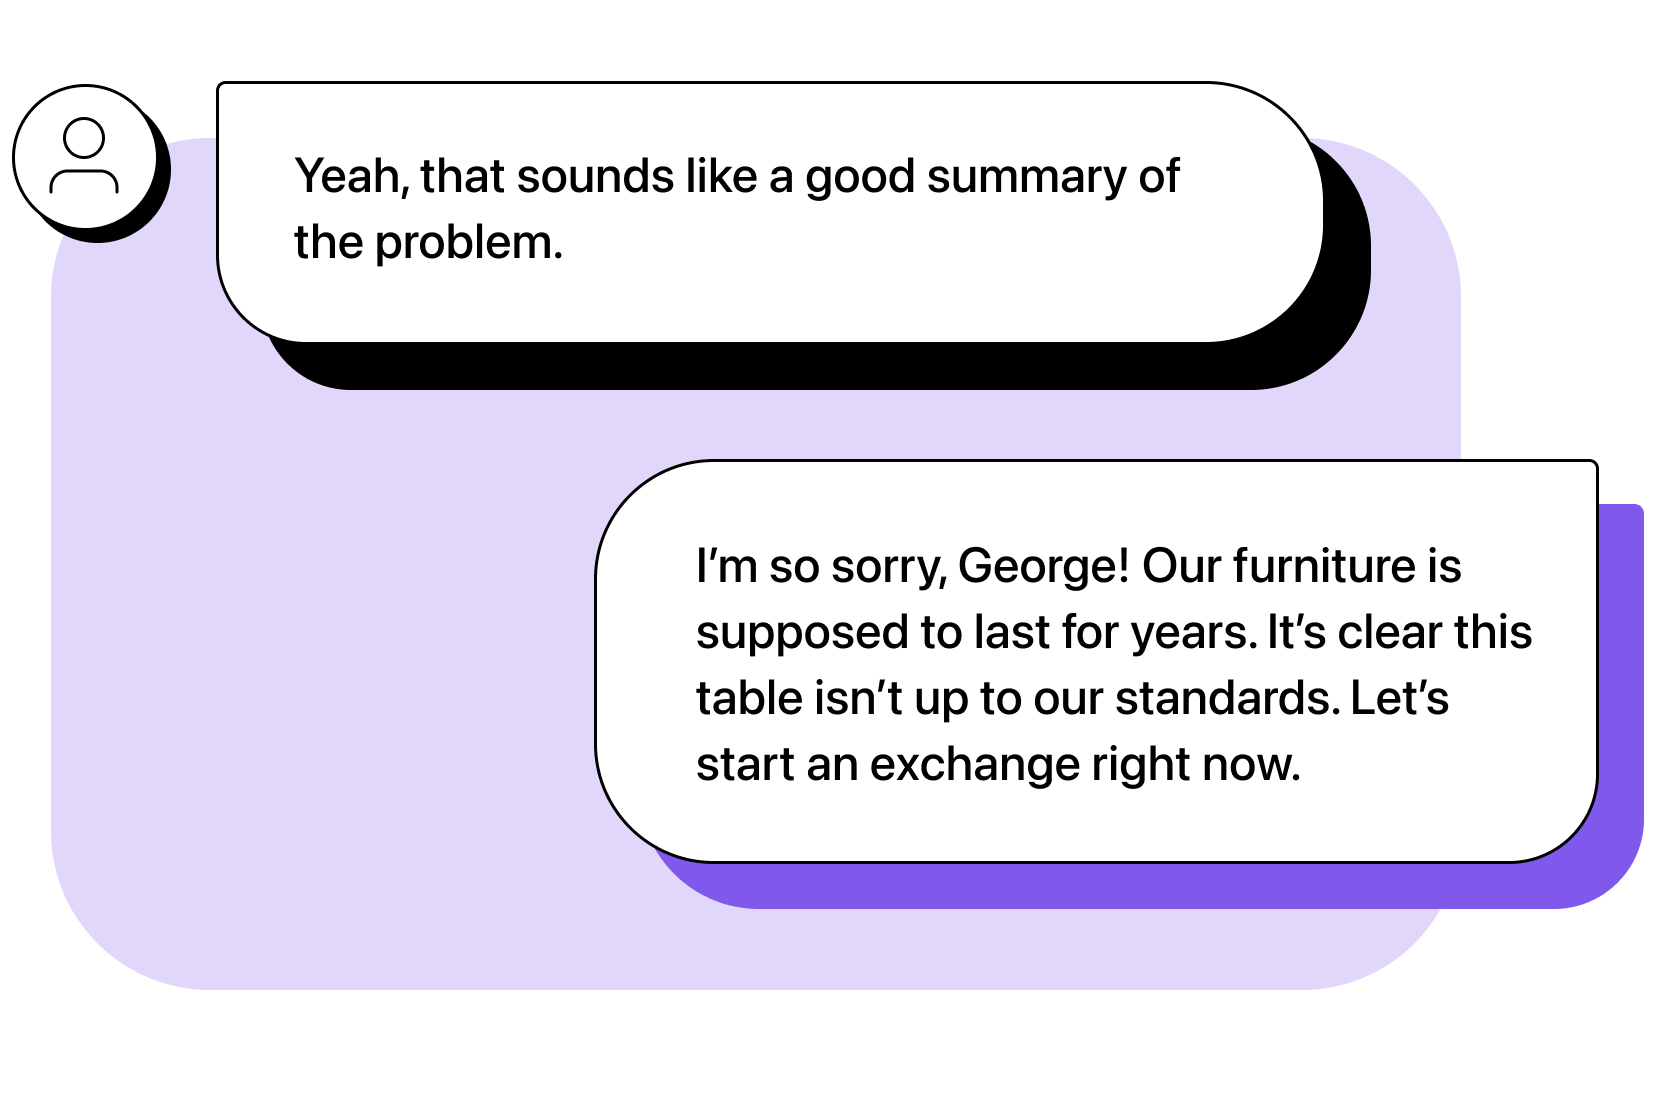 Customer: Yeah, that sounds like a good summary of the problem. Agent: I’m so sorry, George! Our furniture is supposed to last for years. It’s clear this table isn’t up to snuff. Let’s start an exchange right now.